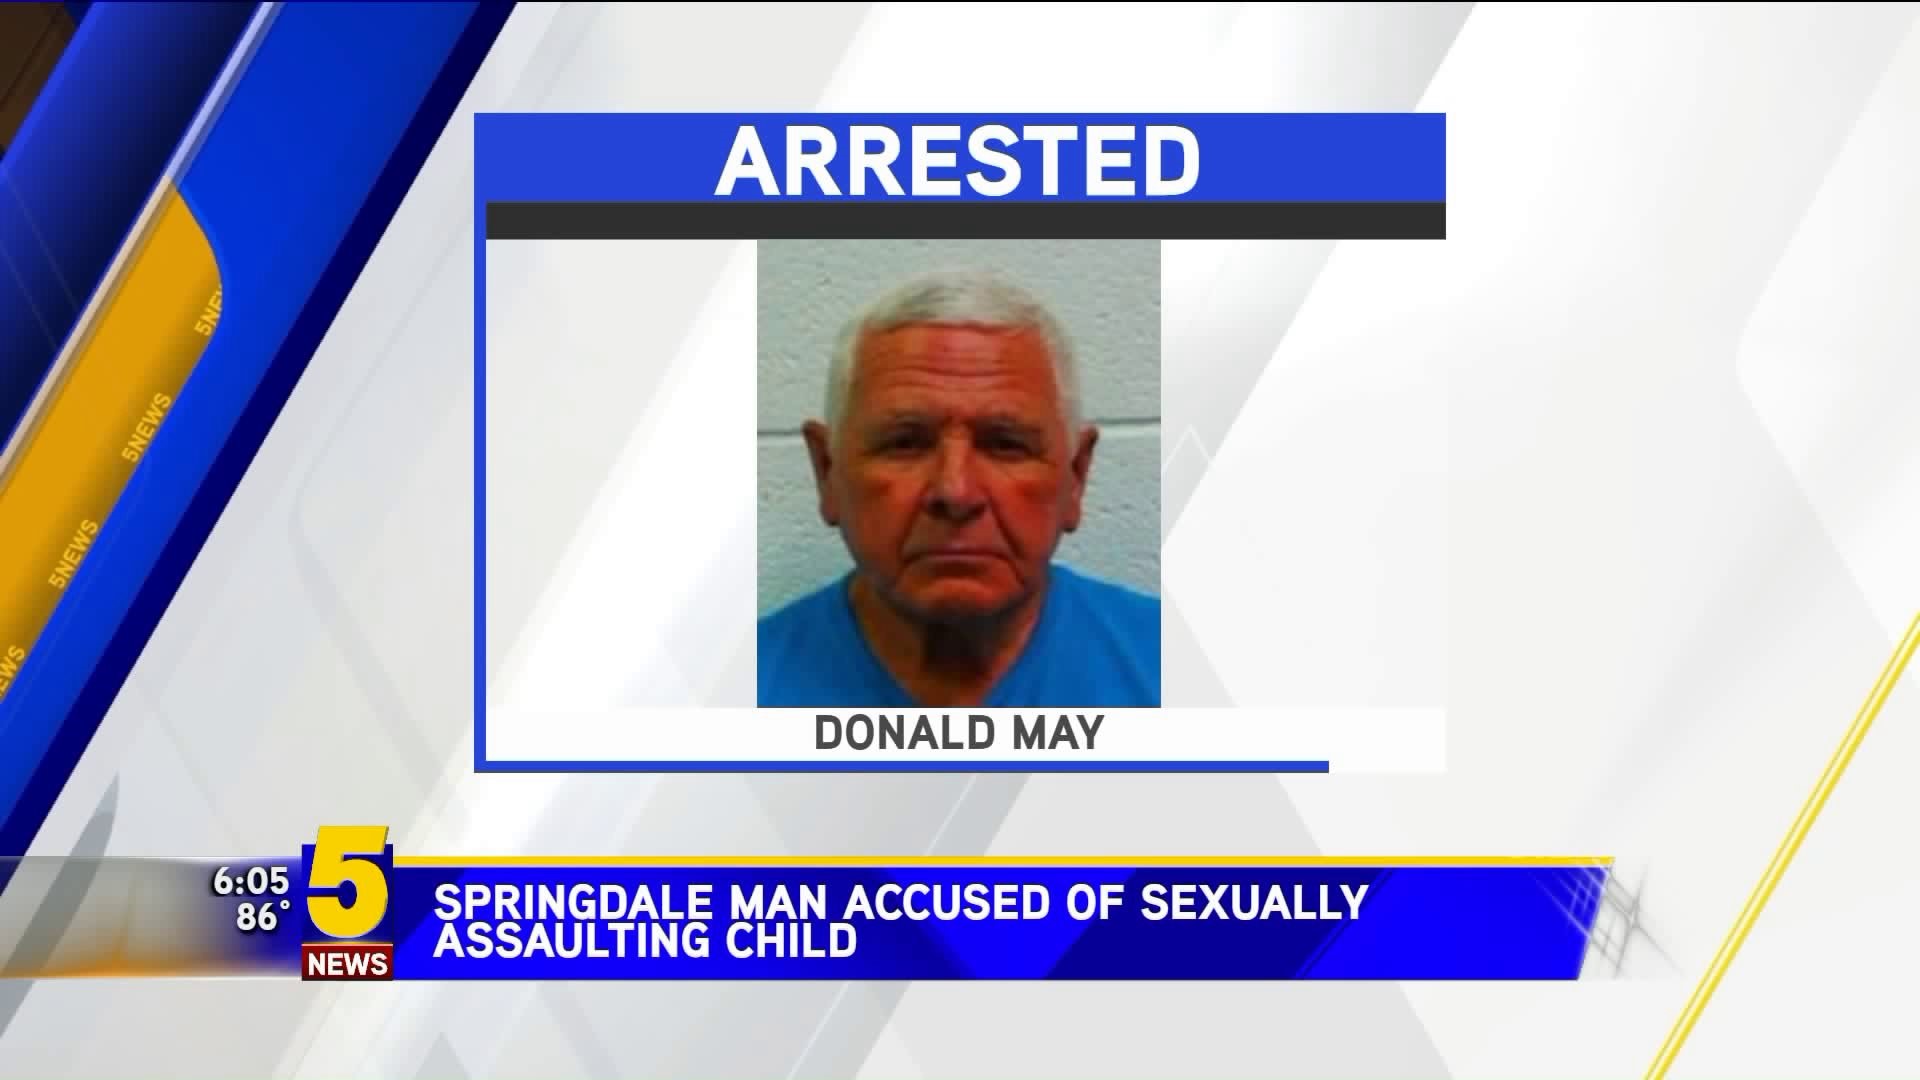 Springdale Man Accused of Sexually Assualting Child